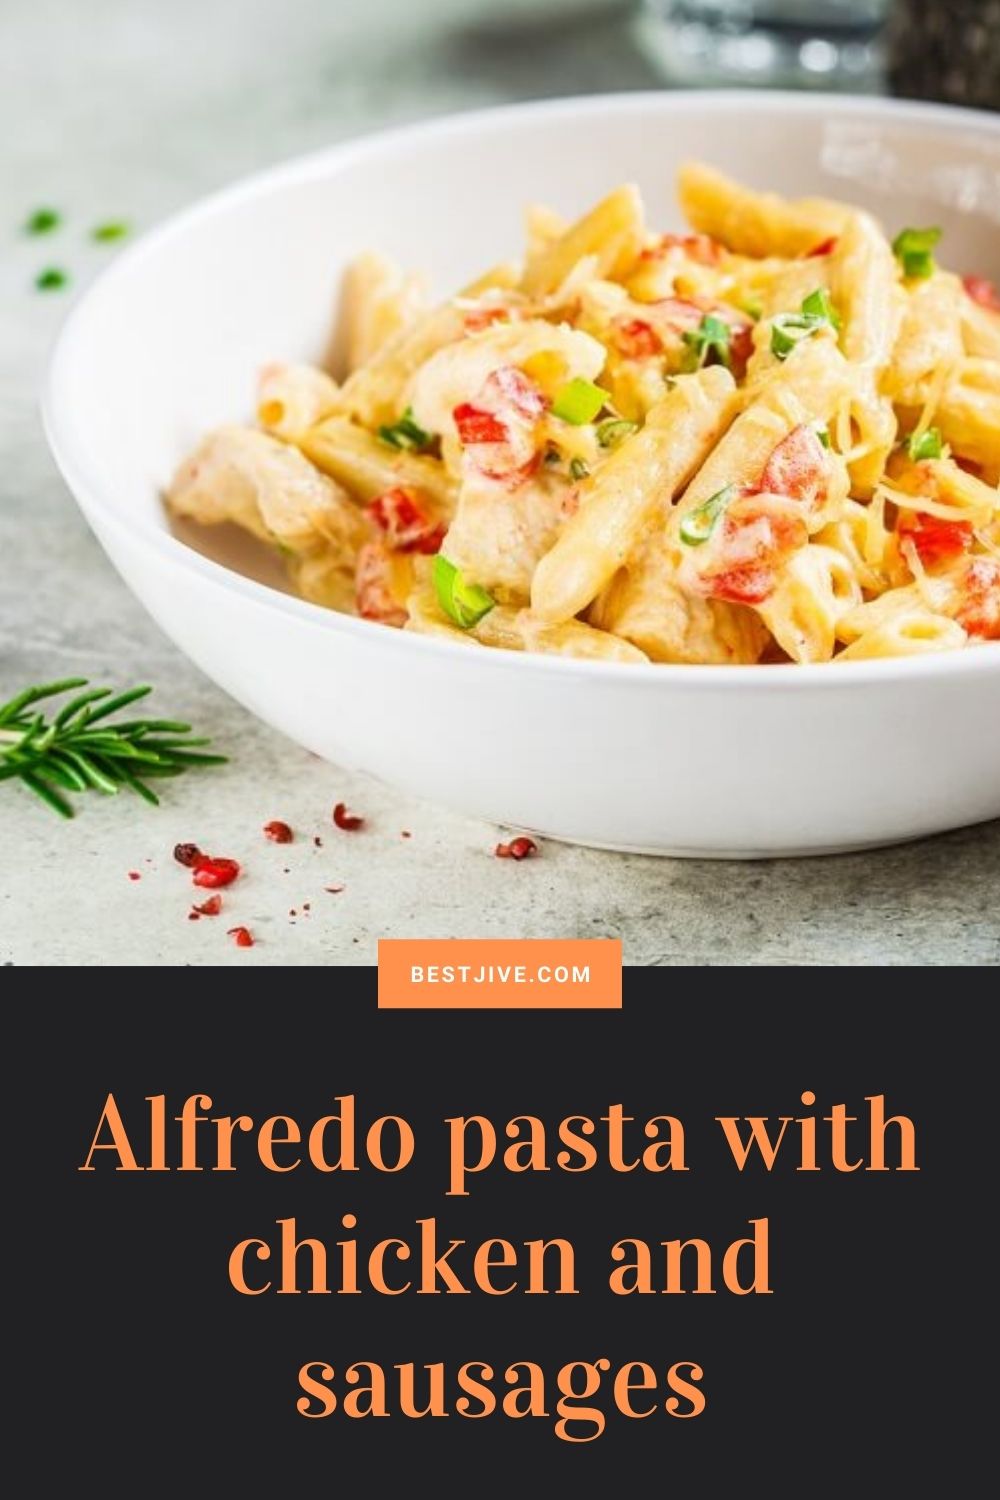 Alfredo pasta with chicken and sausages